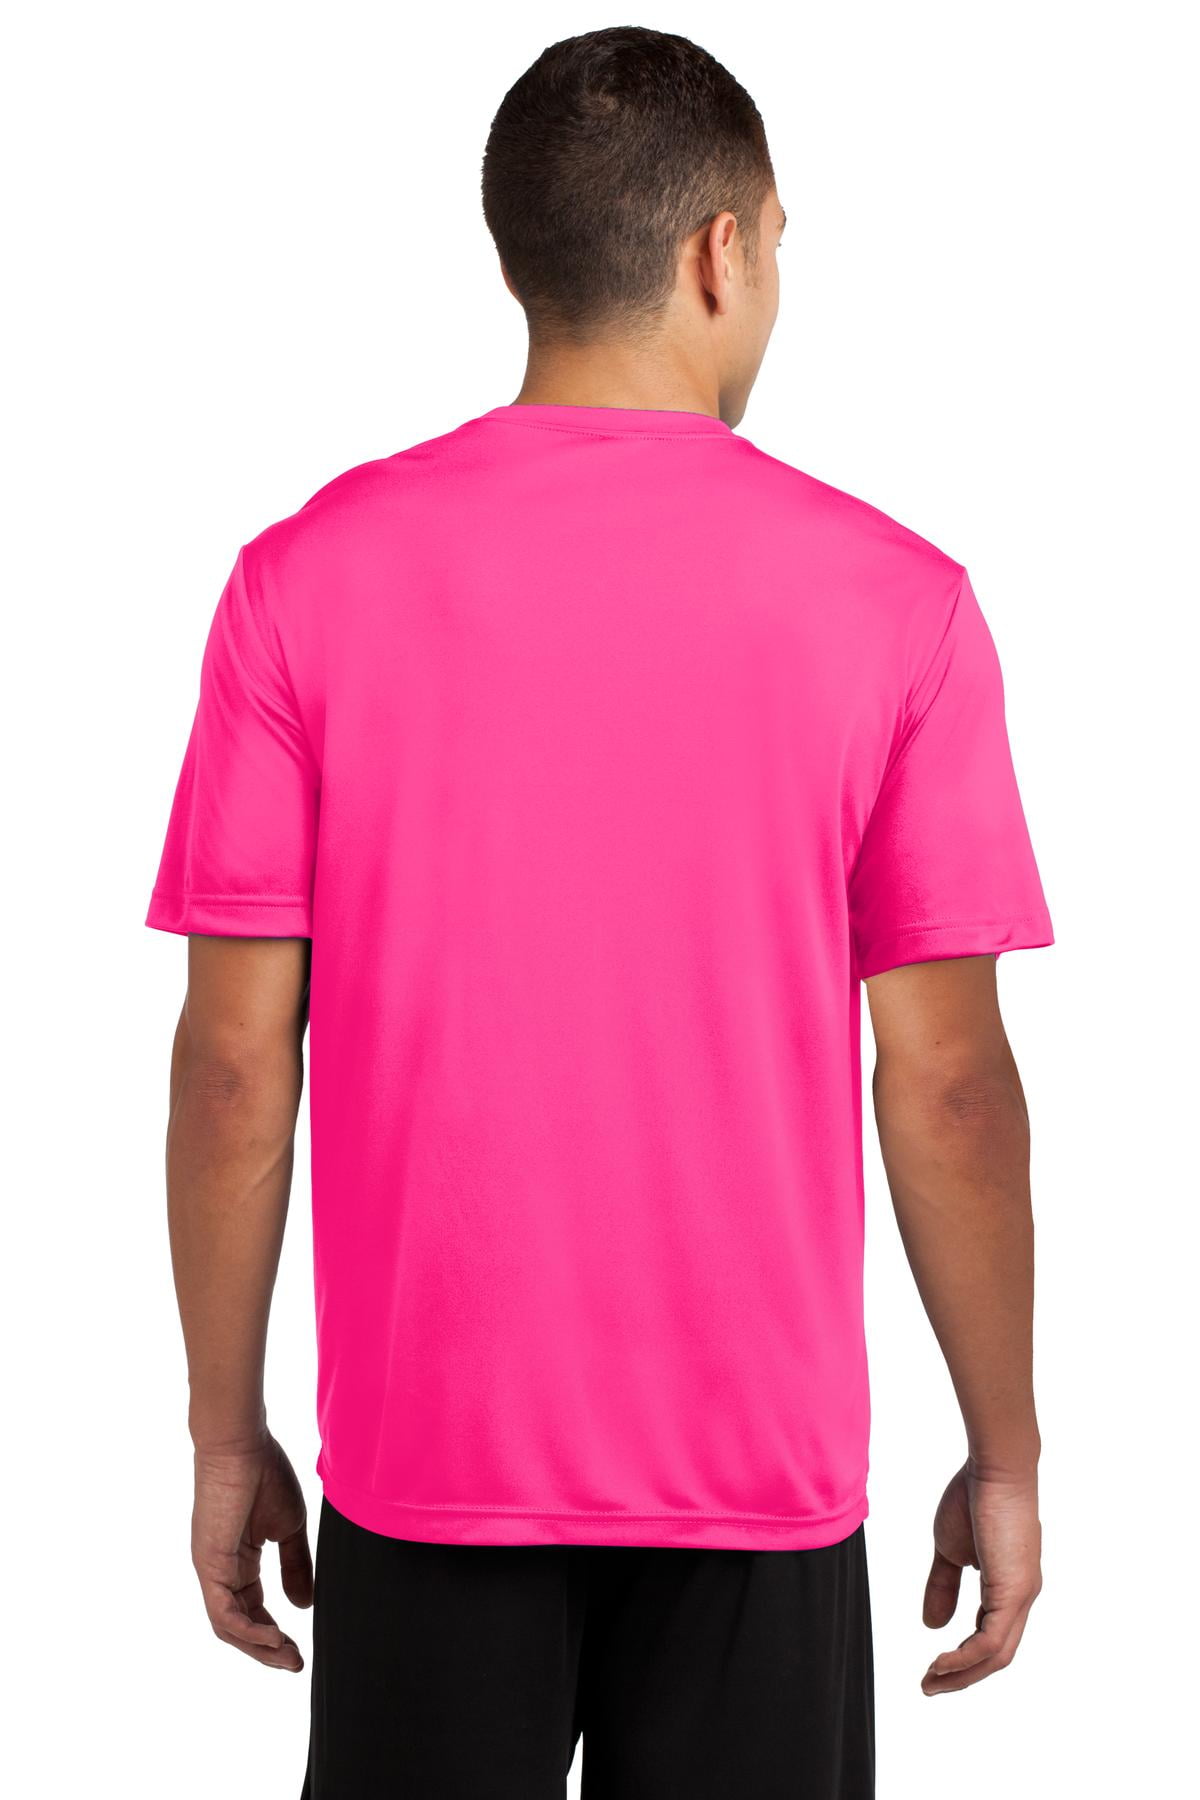 Sport-Tek Posicharge Competitor Neon Tee Pink St350 L - 